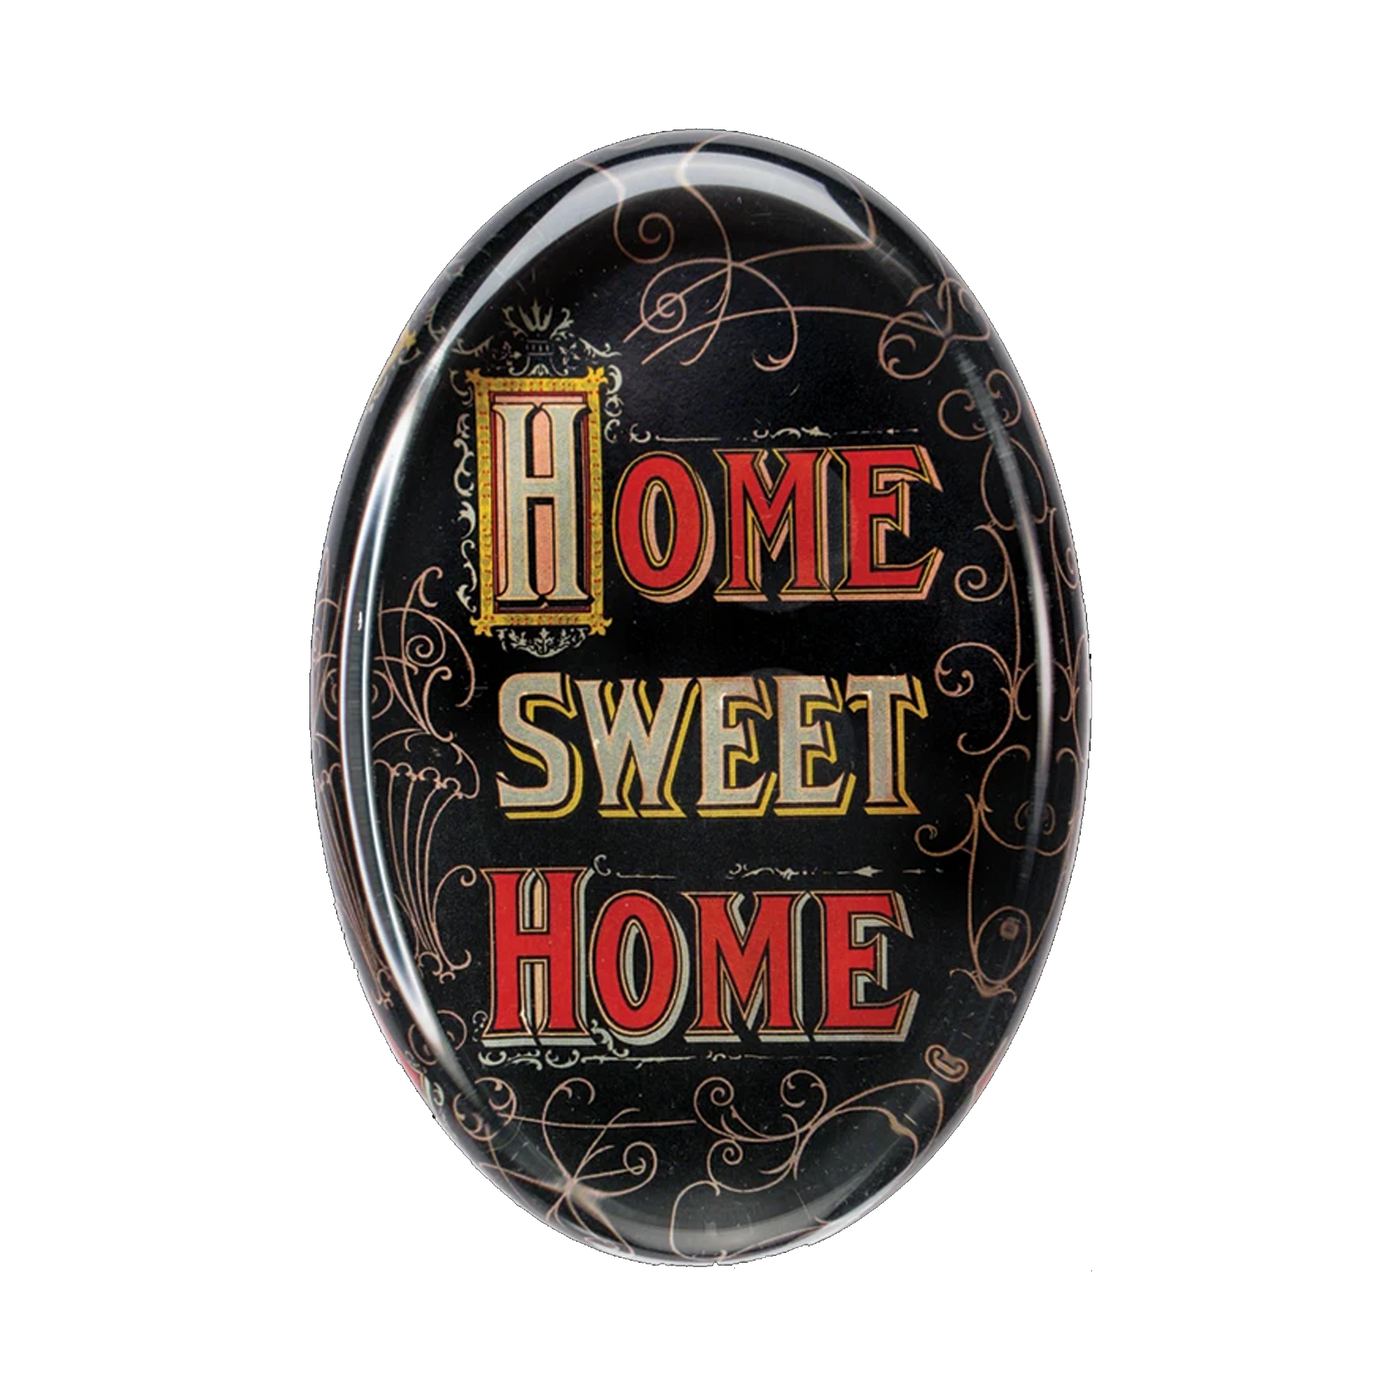 Home Sweet Home Oval Paperweight